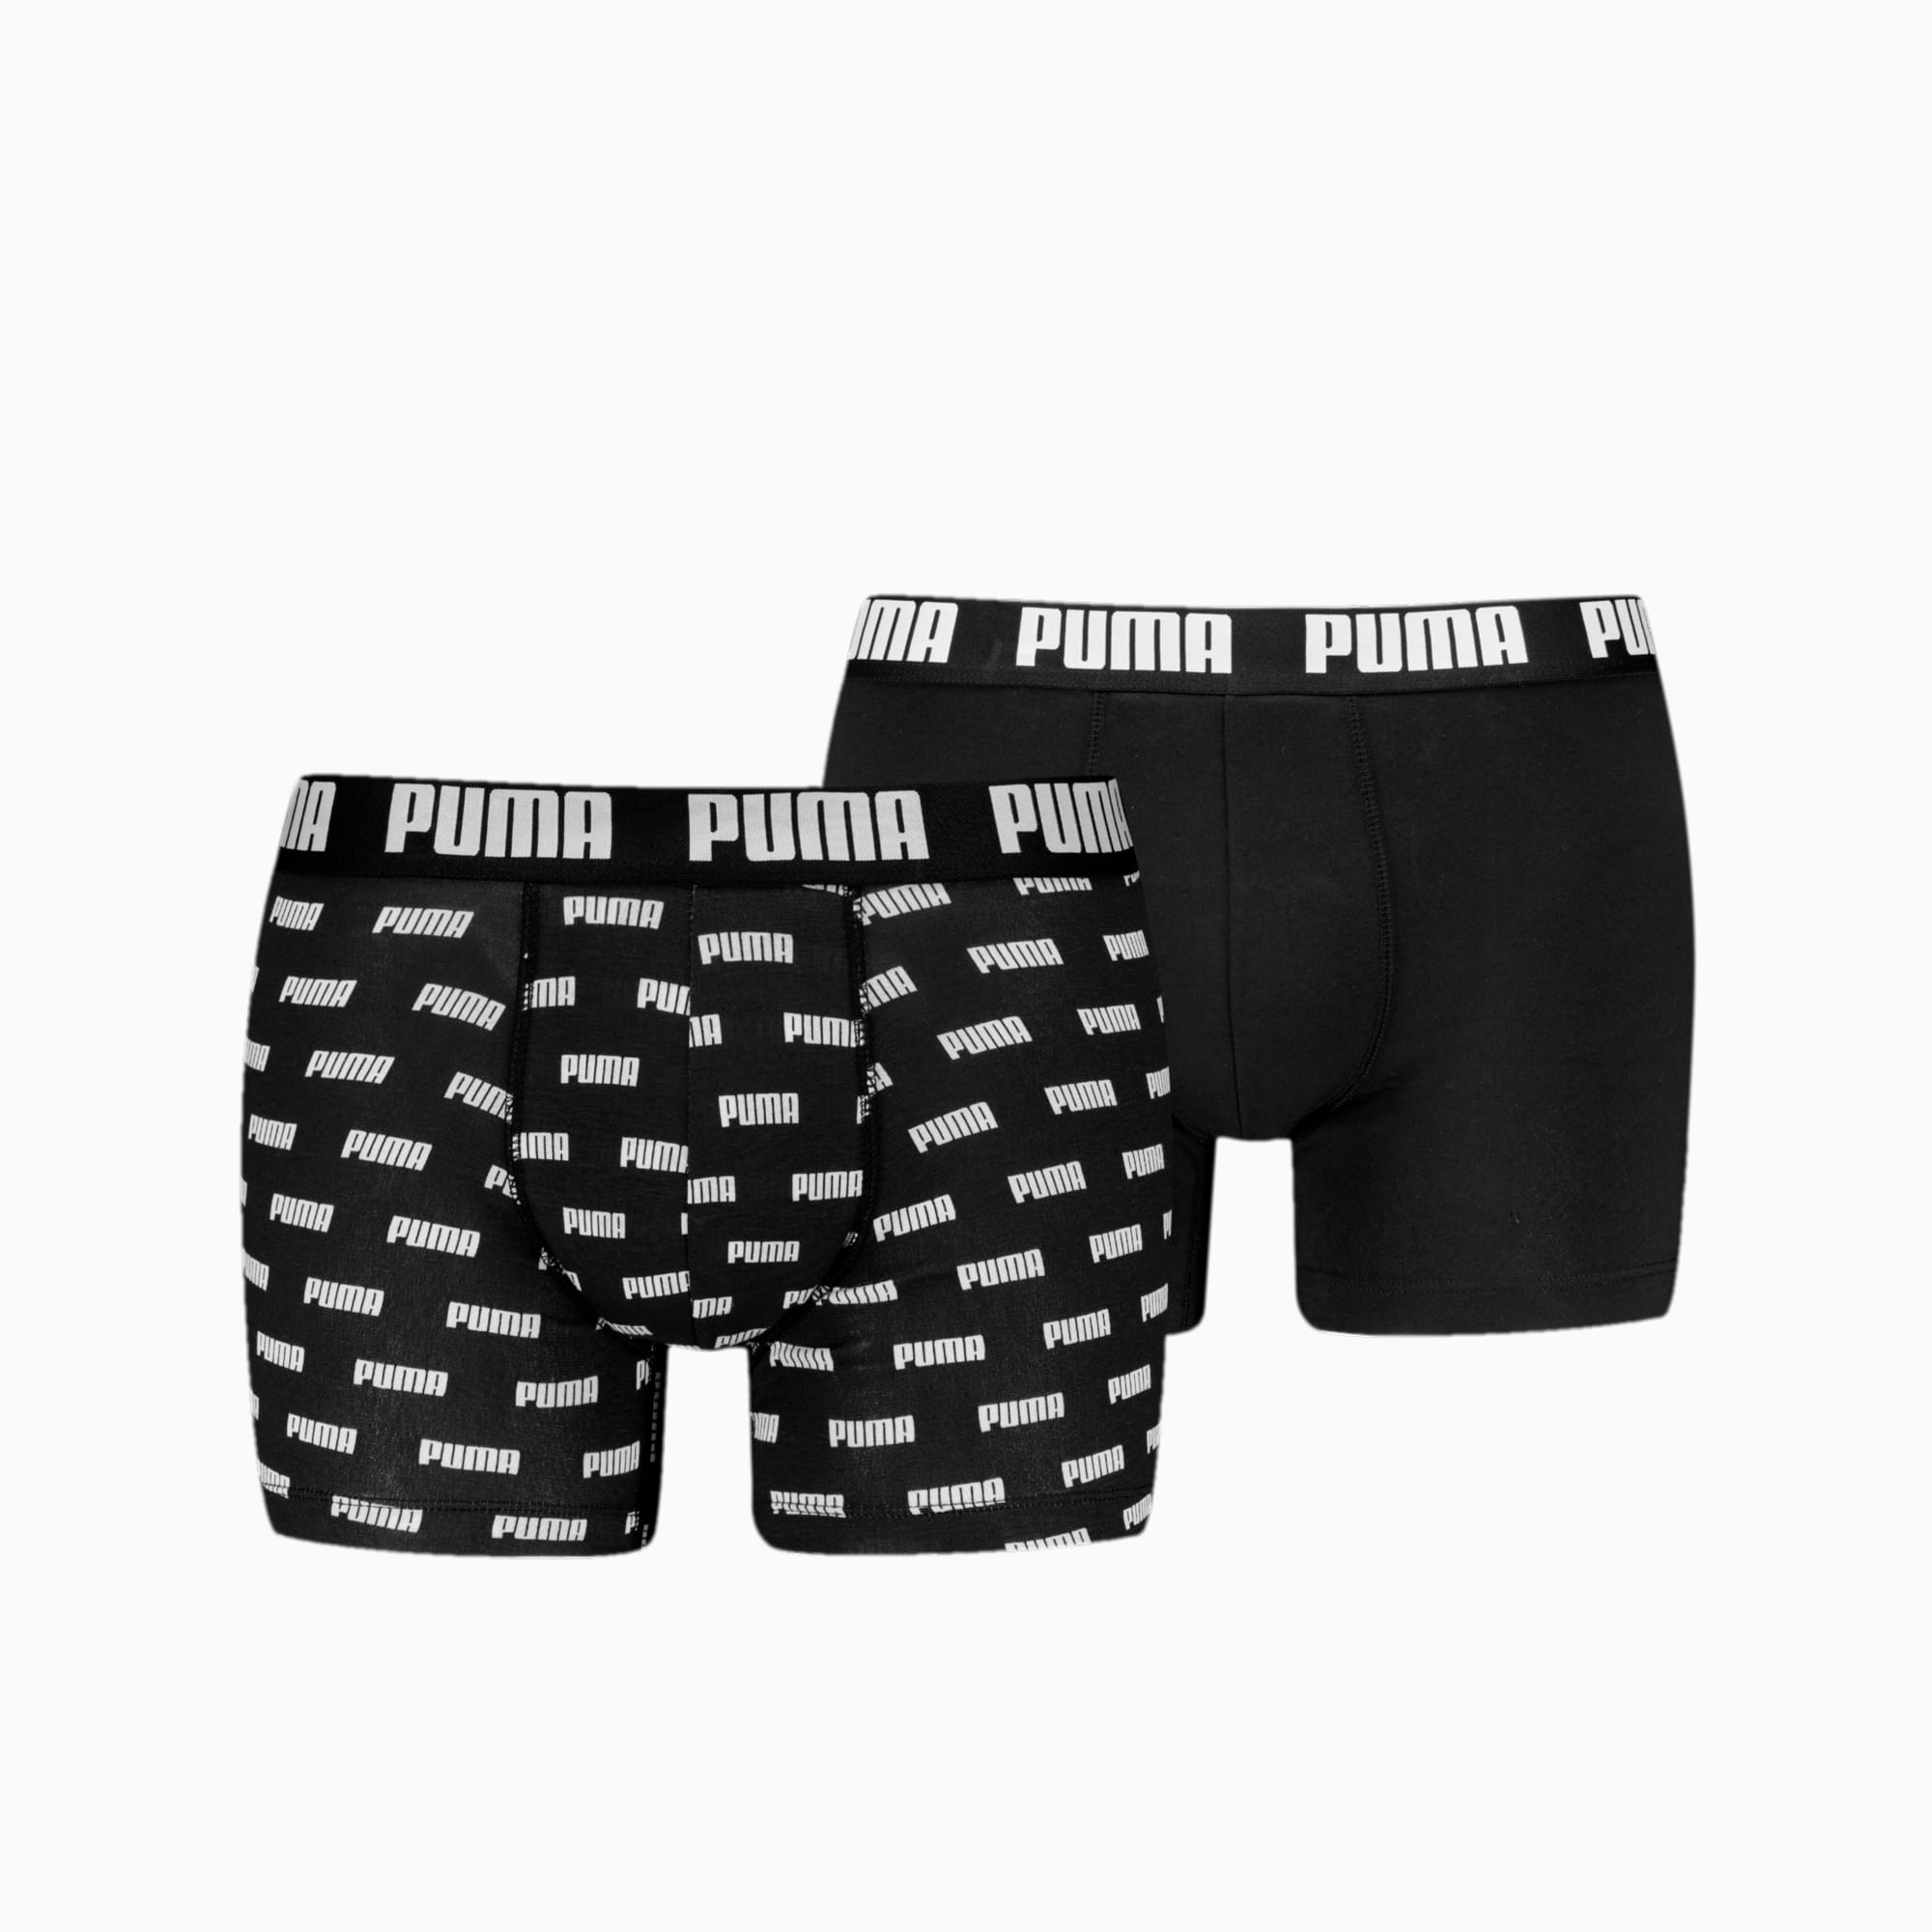 Men's Boxer Brief Stretch Collection (2 Pack)